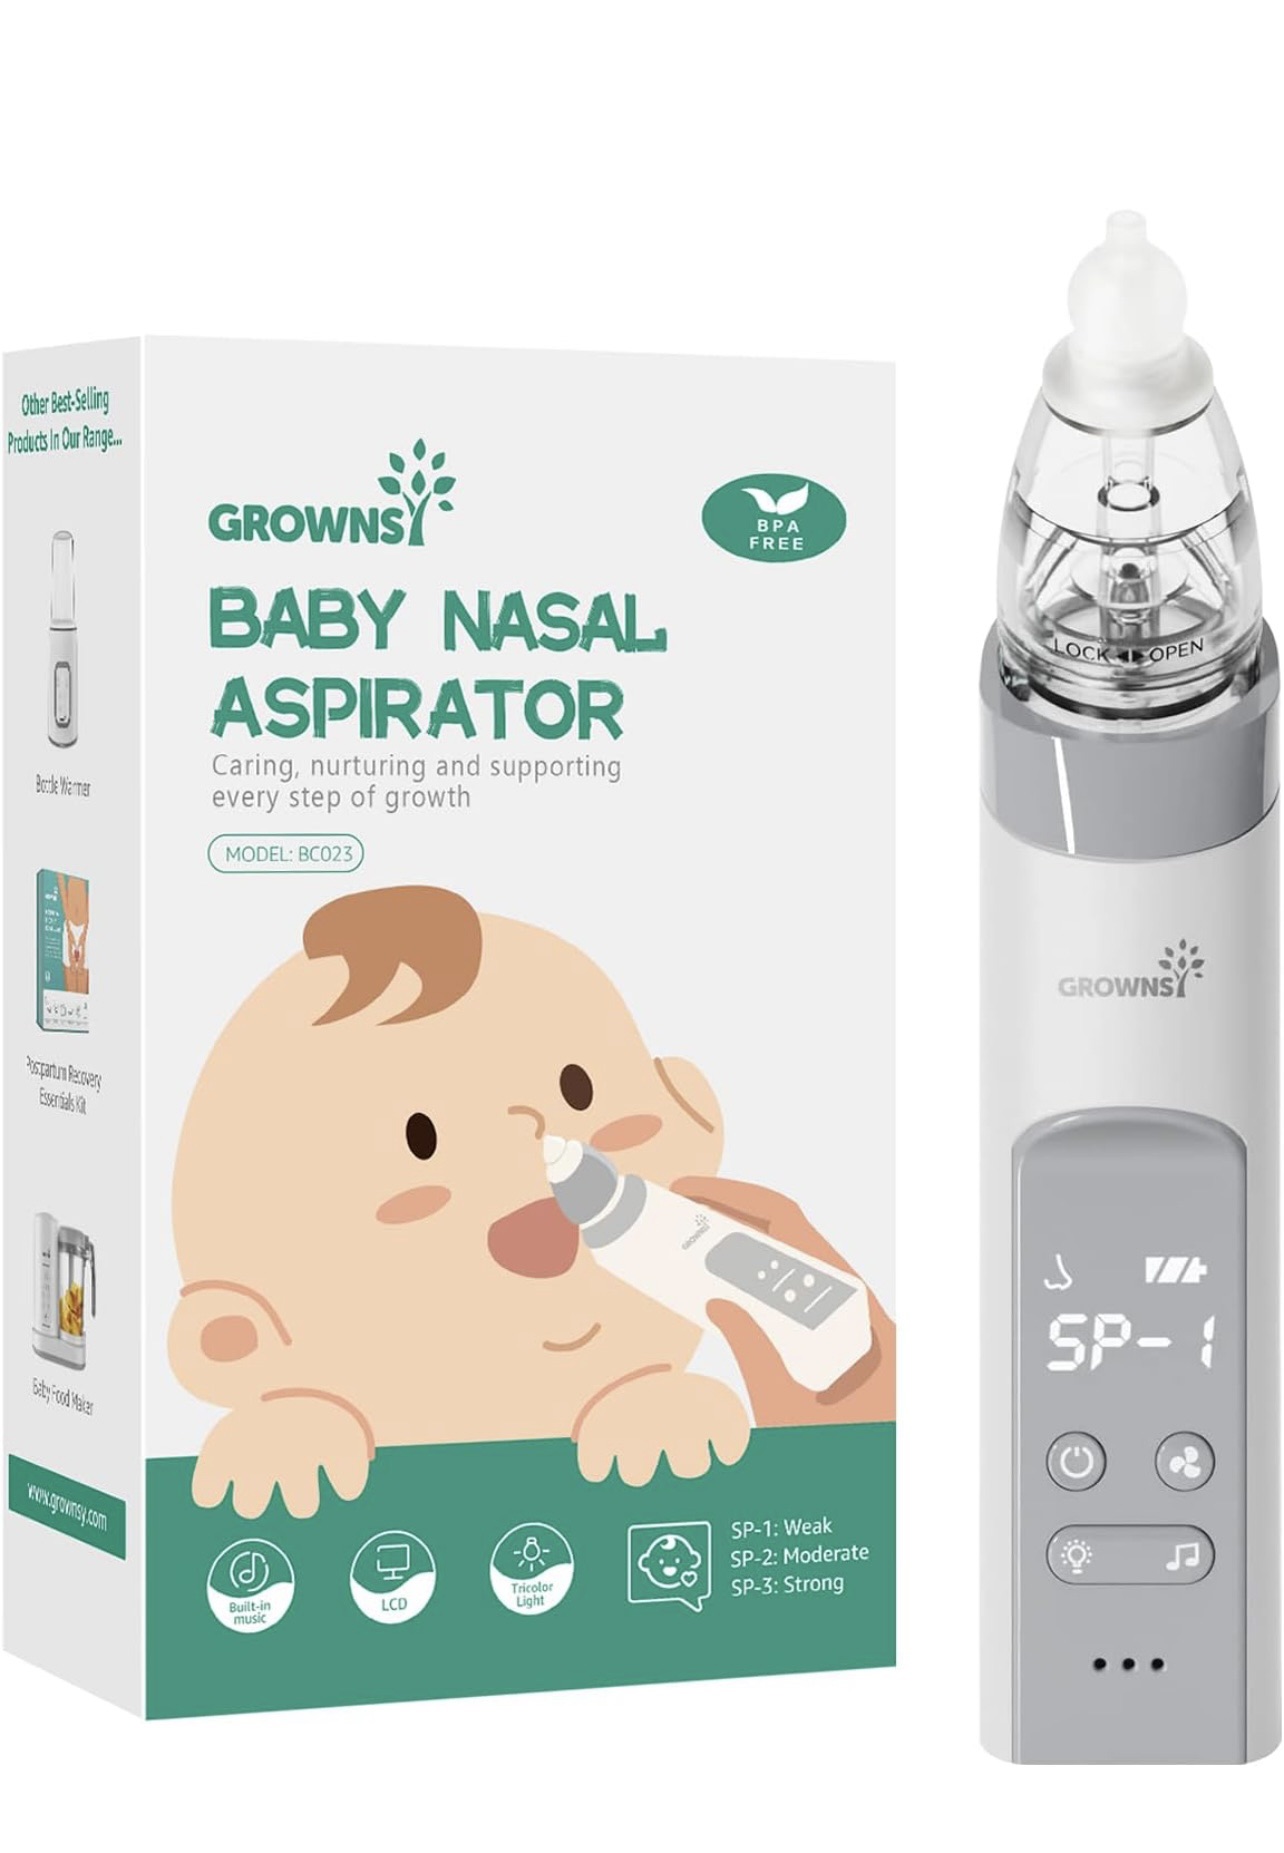 Amazon.com: GROWNSY Nasal Aspirator for Baby, Electric Nose Aspirator for Toddler, Baby Nose Sucker, Automatic Nose Cleaner with 3 Silicone Tips, Adjustable Suction Level, Music and Light Soothing Fun